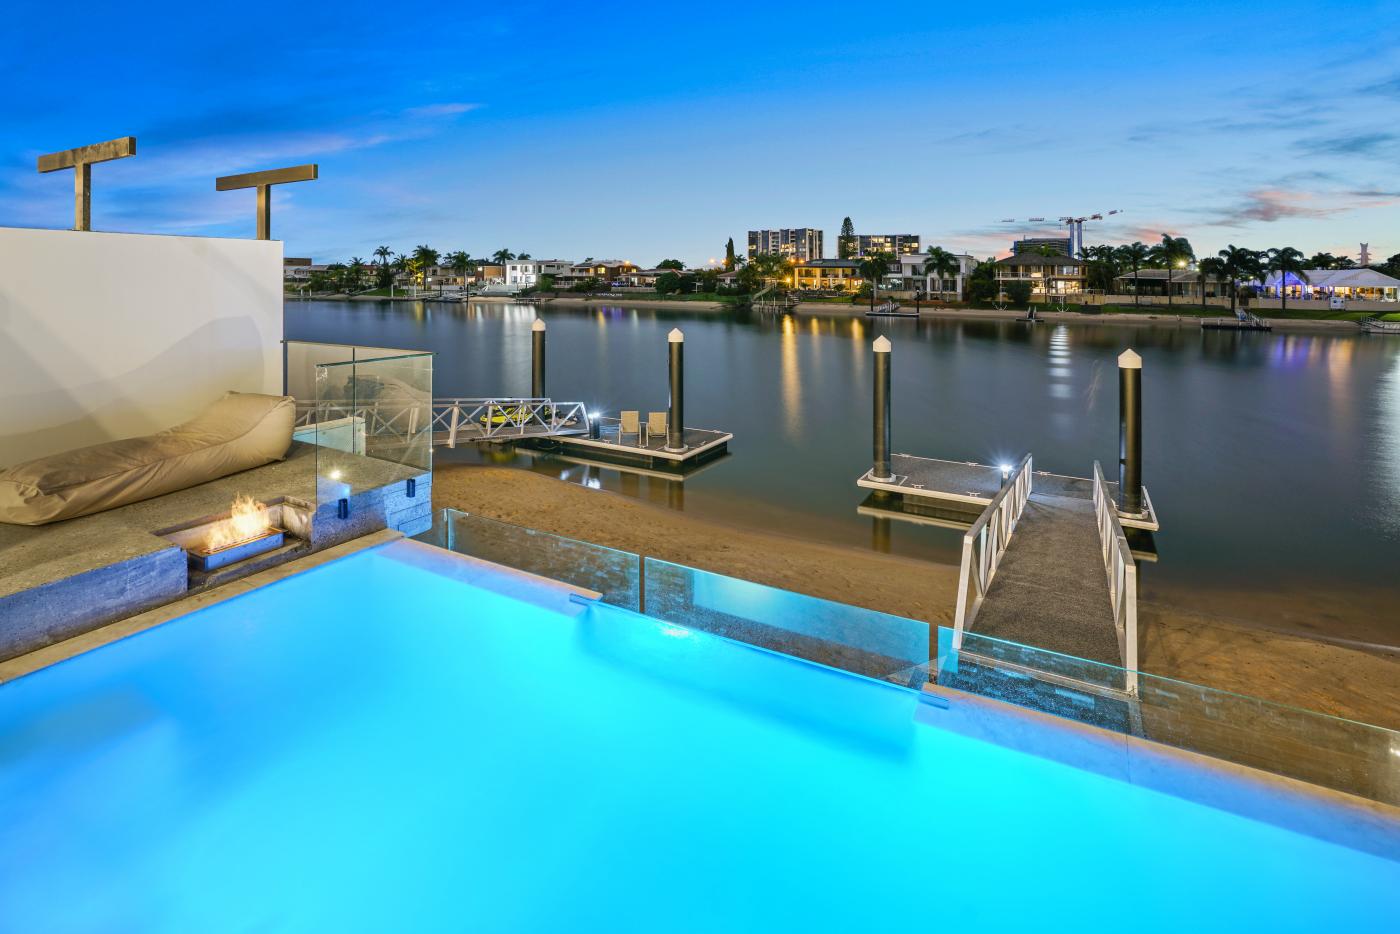 M-Motion Real Estate Agency, 11A Yunga Court Broadbeach Waters, QLD, 4218, Michael Mahon, Lauren Mahon, Best Real Estate Agent Gold Coast